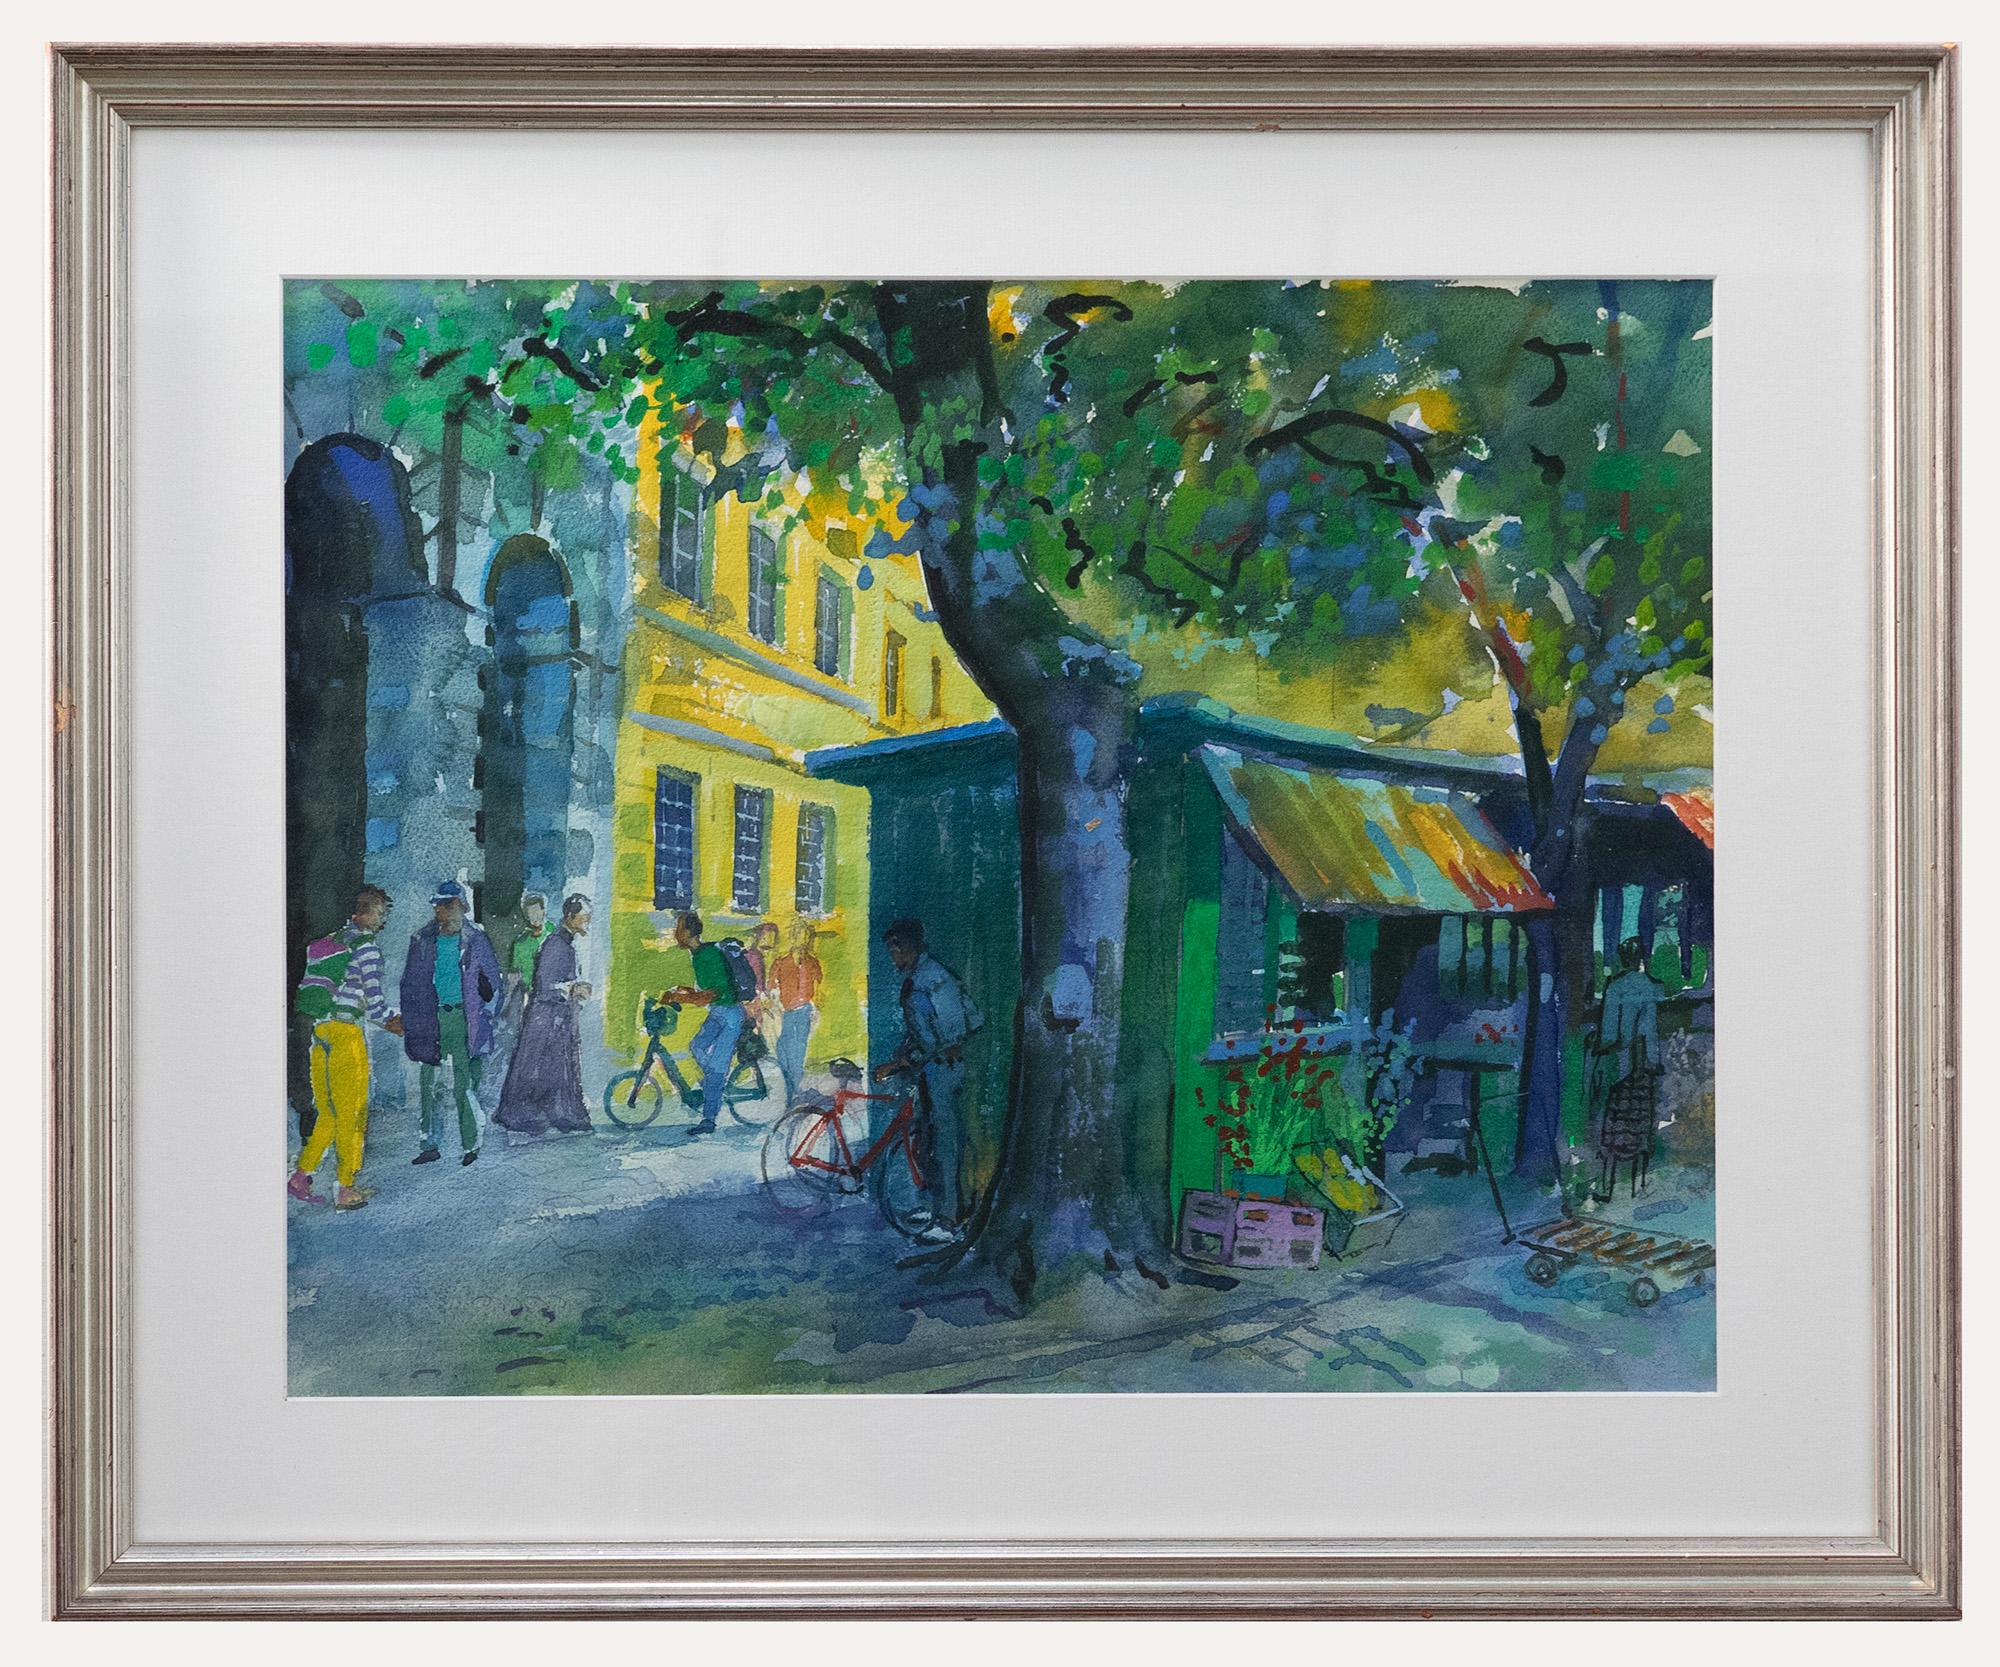 Unknown Landscape Art - Attrib. David Woods - Framed Contemporary Watercolour, Flower Stalls in the City